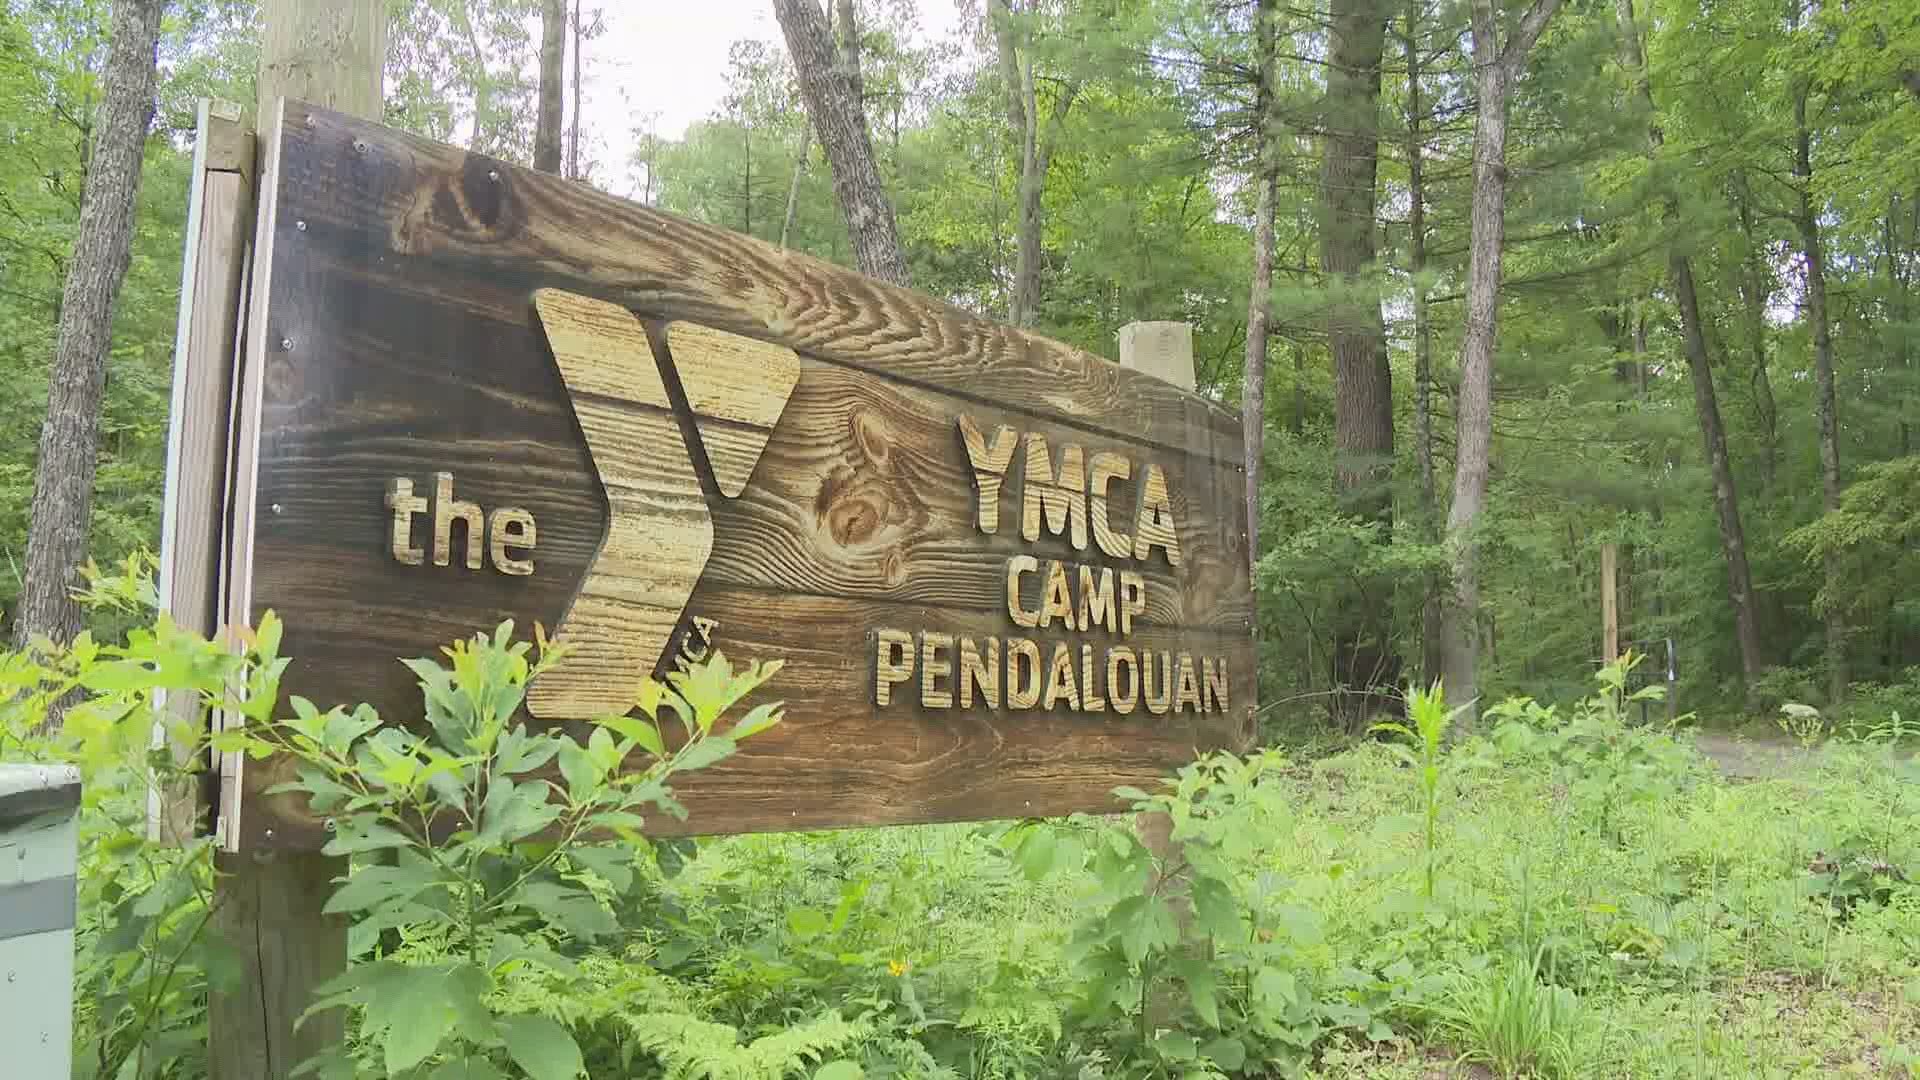 Muskegon YMCA Camp Pendalouan is working with the State of Michigan to provide housing for legal agricultural workers who have tested positive for COVID-19.